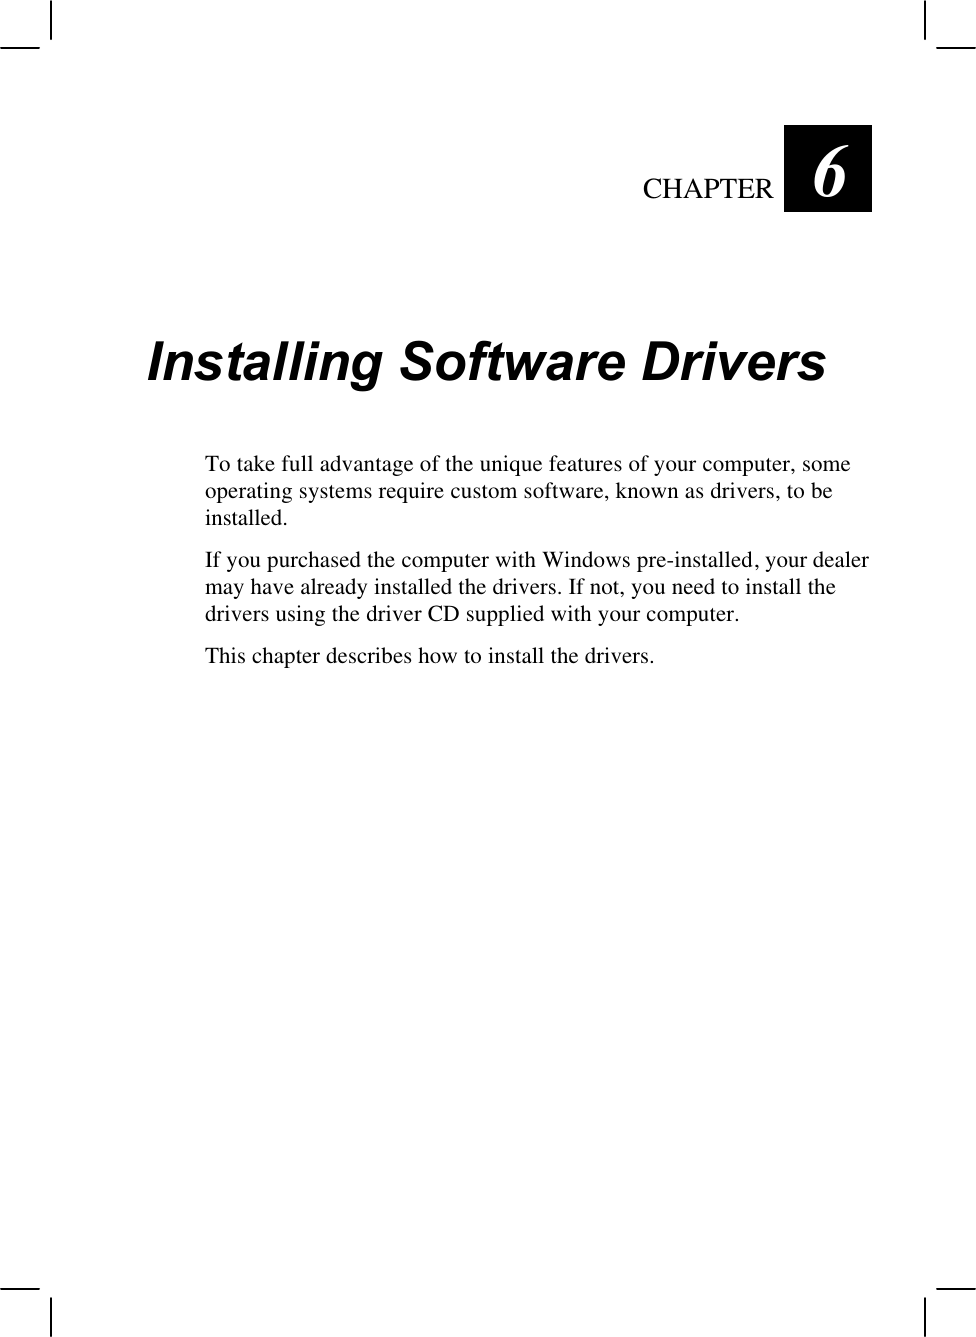 CHAPTER 6Installing Software DriversTo take full advantage of the unique features of your computer, someoperating systems require custom software, known as drivers, to beinstalled.If you purchased the computer with Windows pre-installed, your dealermay have already installed the drivers. If not, you need to install thedrivers using the driver CD supplied with your computer.This chapter describes how to install the drivers.